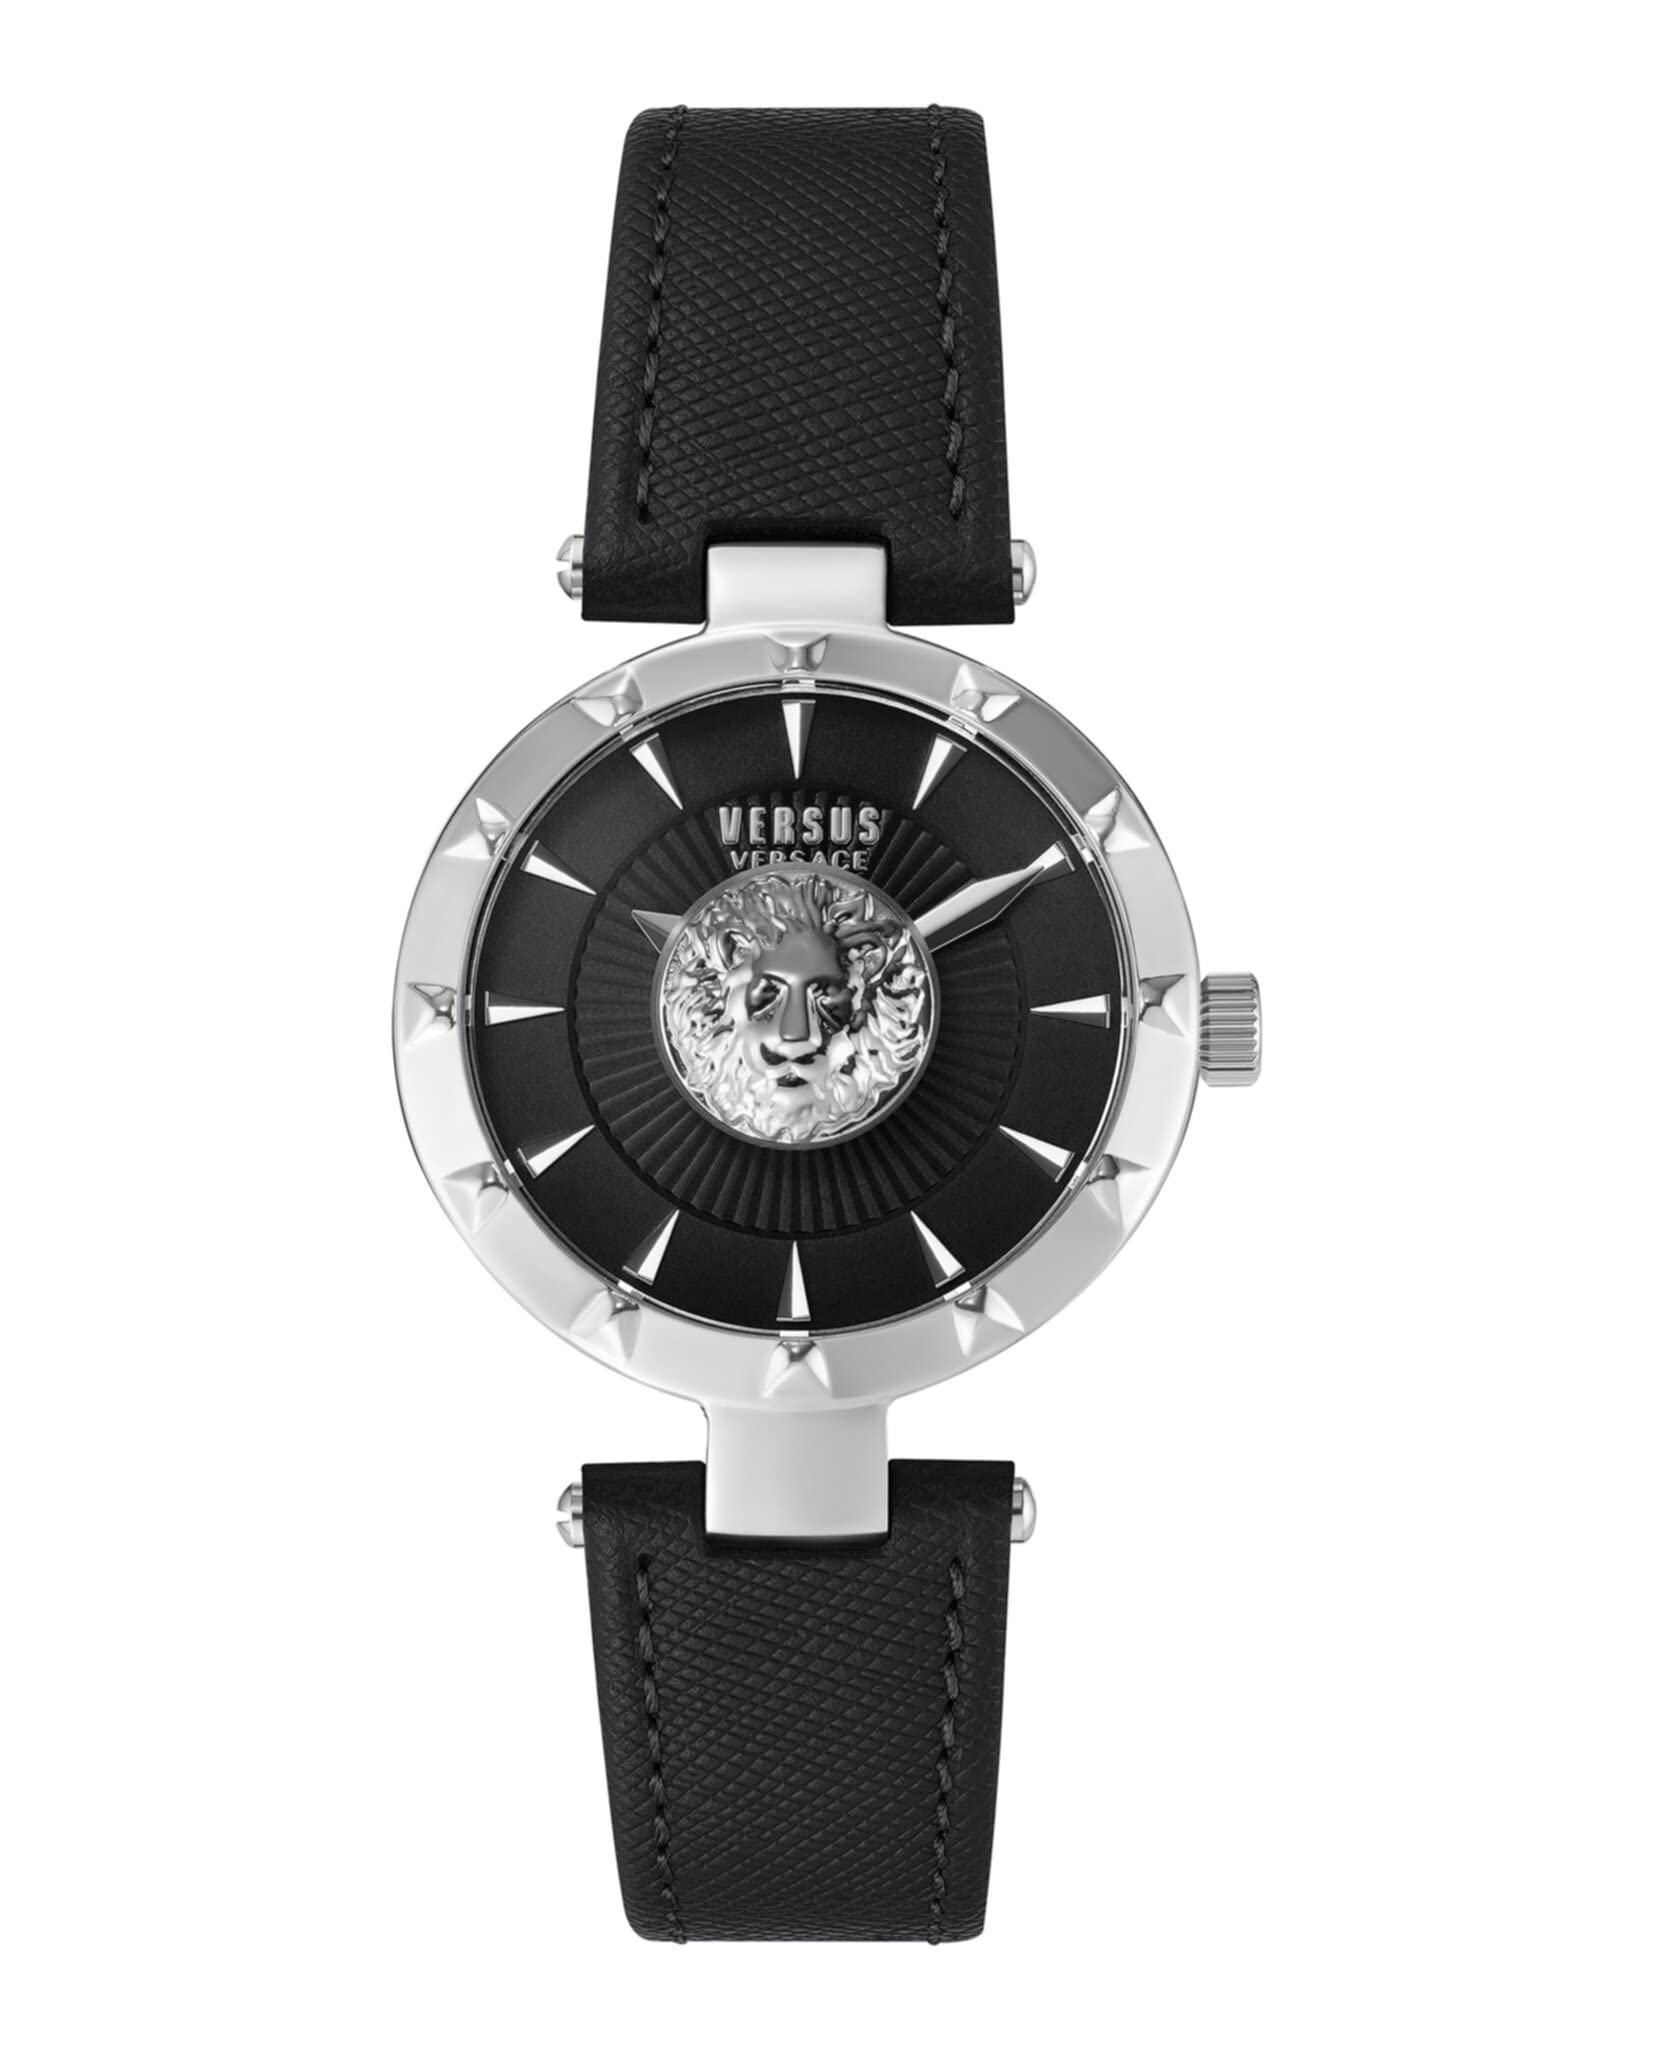 Versus Versace Sertie Collection Luxury Womens Watch Timepiece with a Black Strap Featuring a Stainless Steel Case and Black Dial